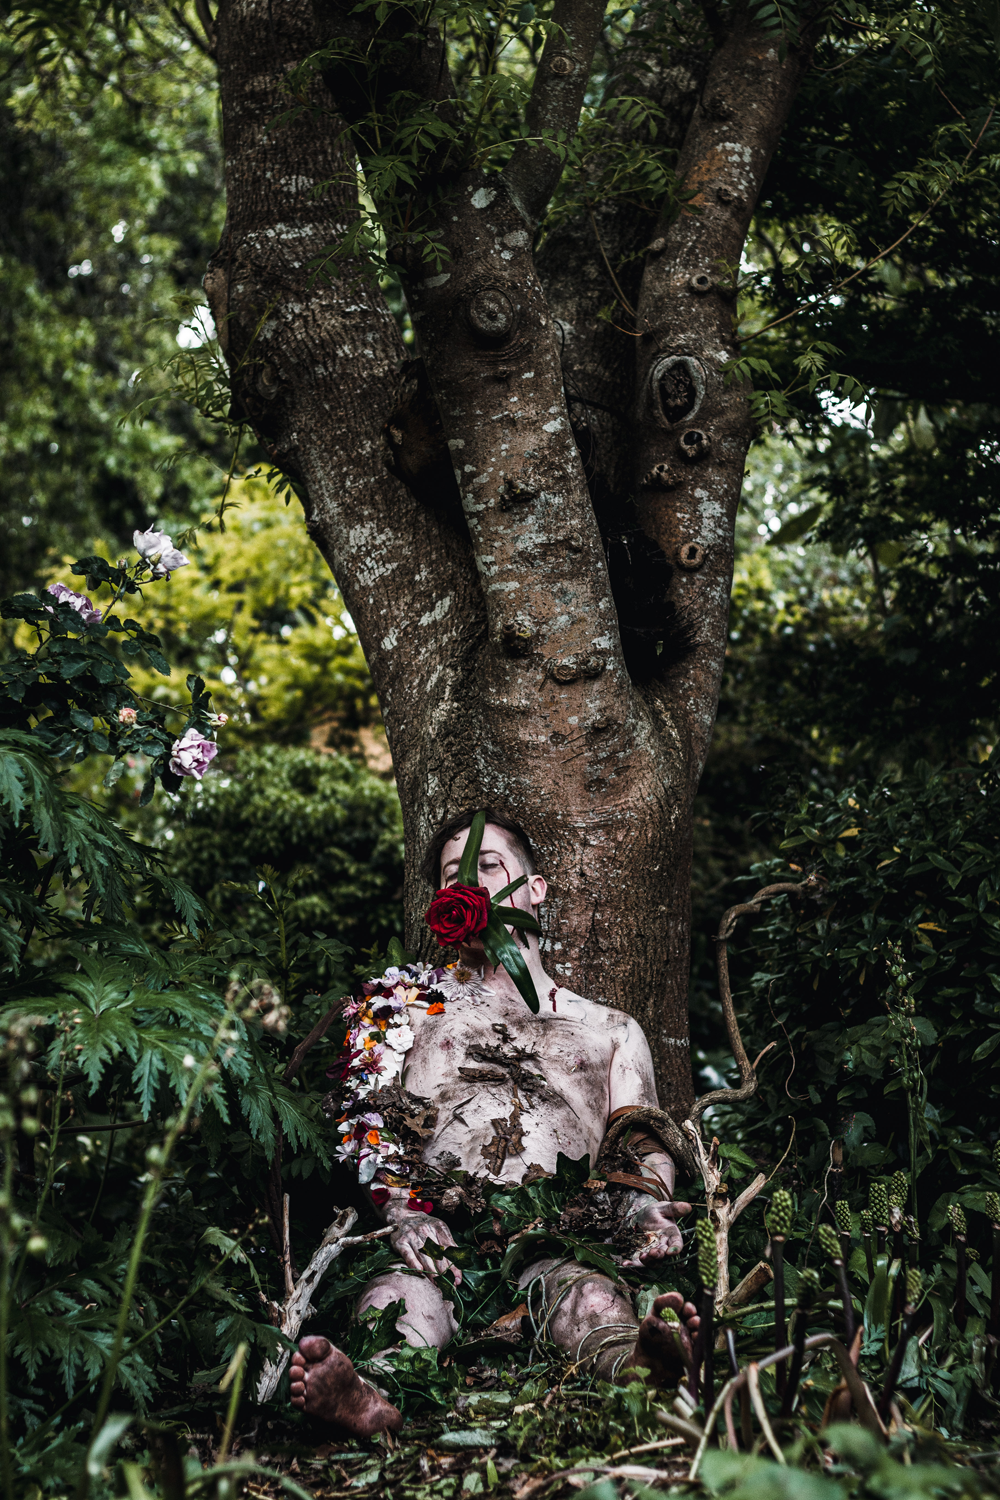 Colour photograph of a man dead against a tree and covered in plants and flowers amongst forest scenery.